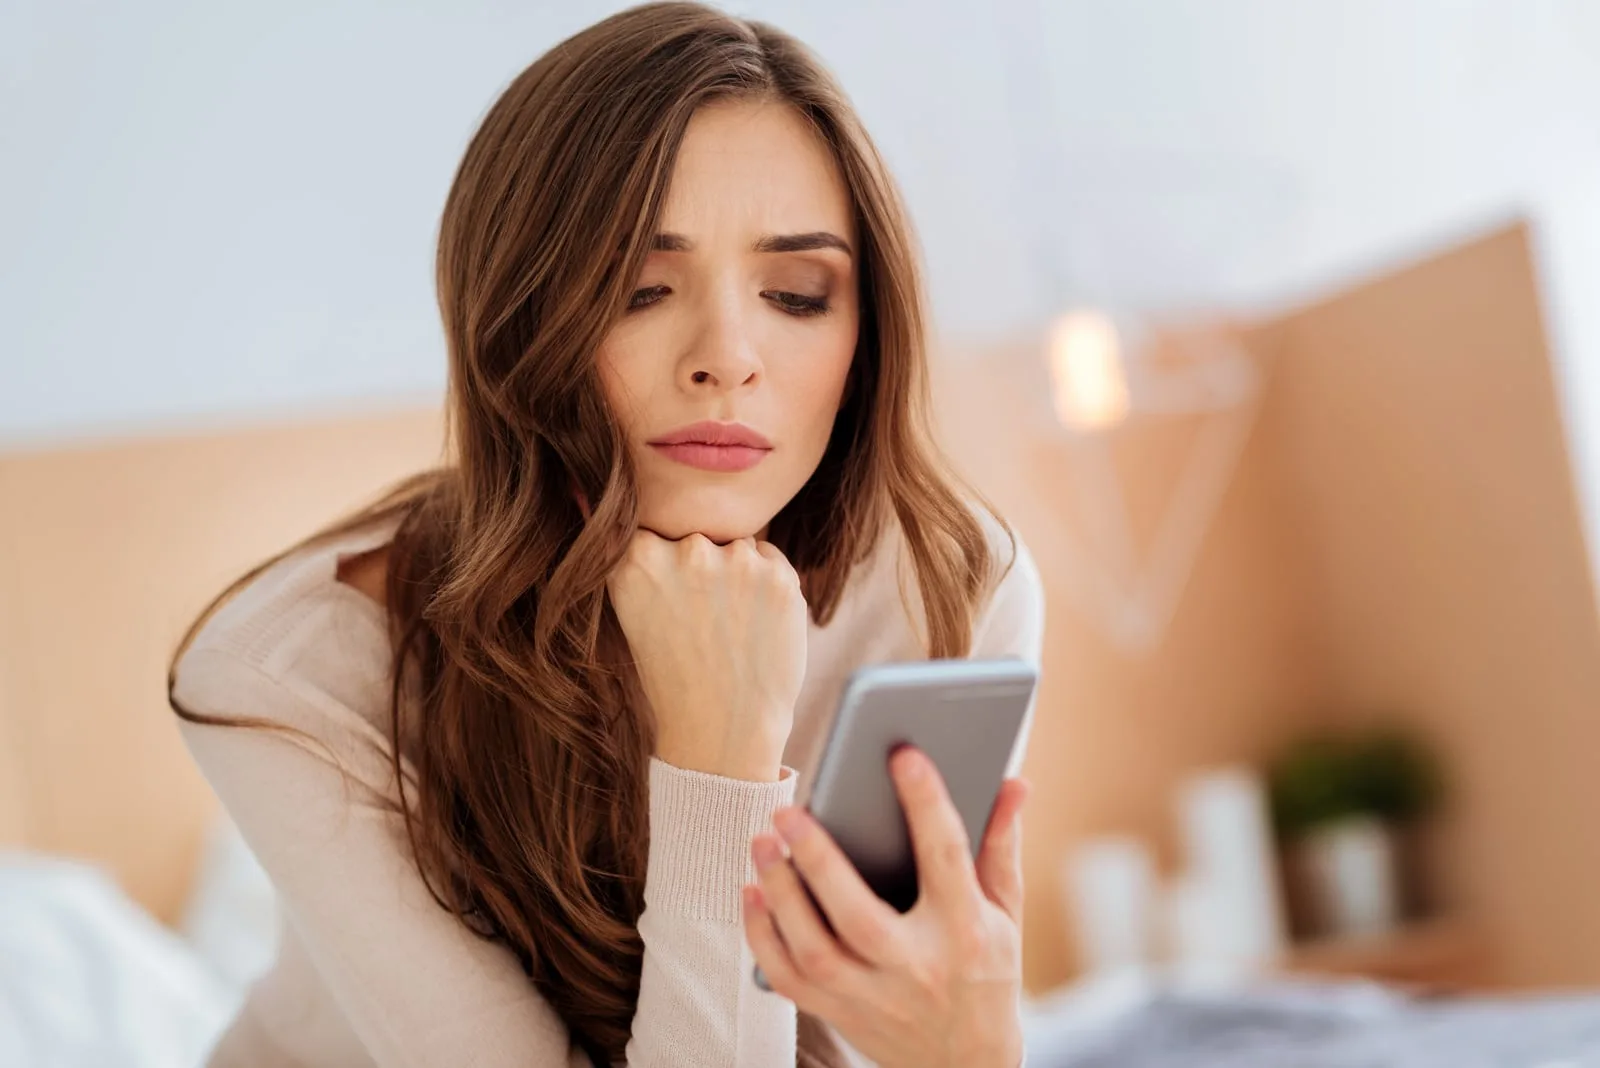 the woman sits pensively and holds the phone in her hand